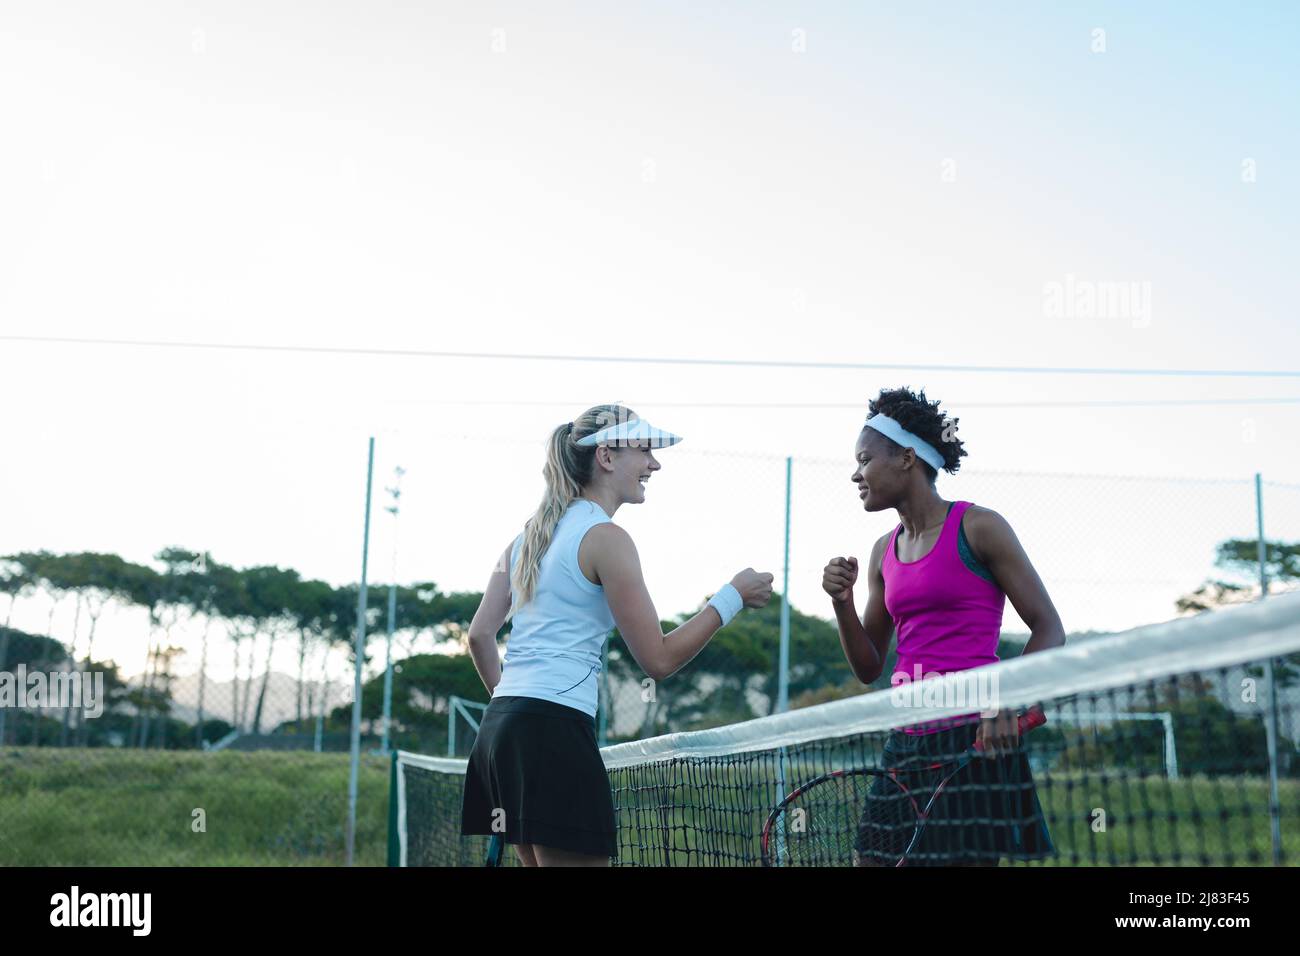 Happy multiracial young female players giving fist bump over net at tennis court Stock Photo